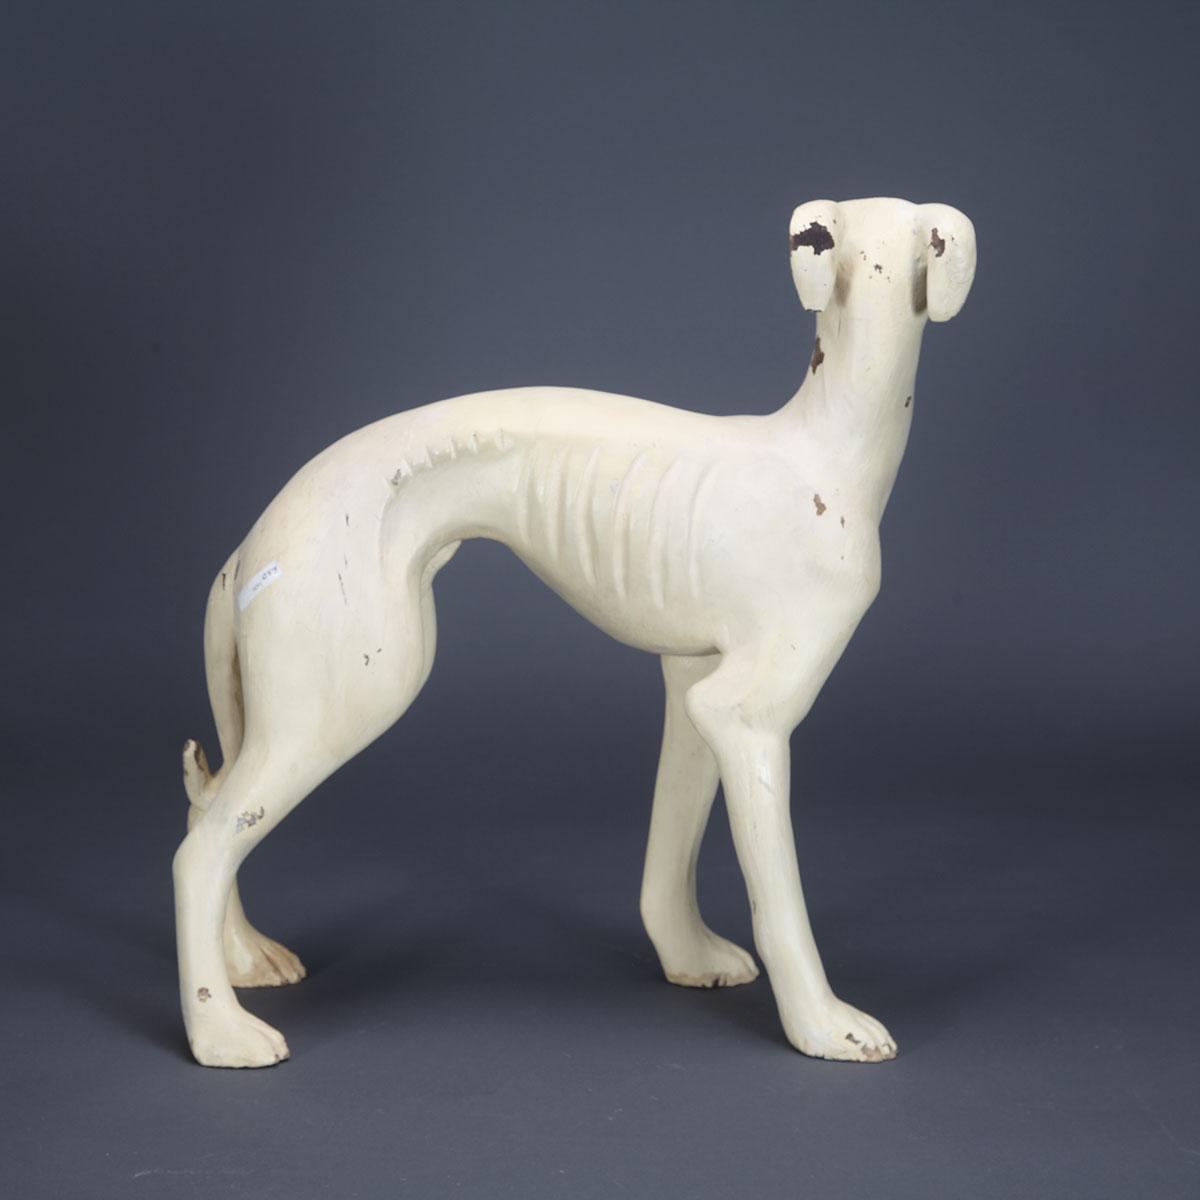 Painted Carved Wood Model of a Greyhound, mid 20th century